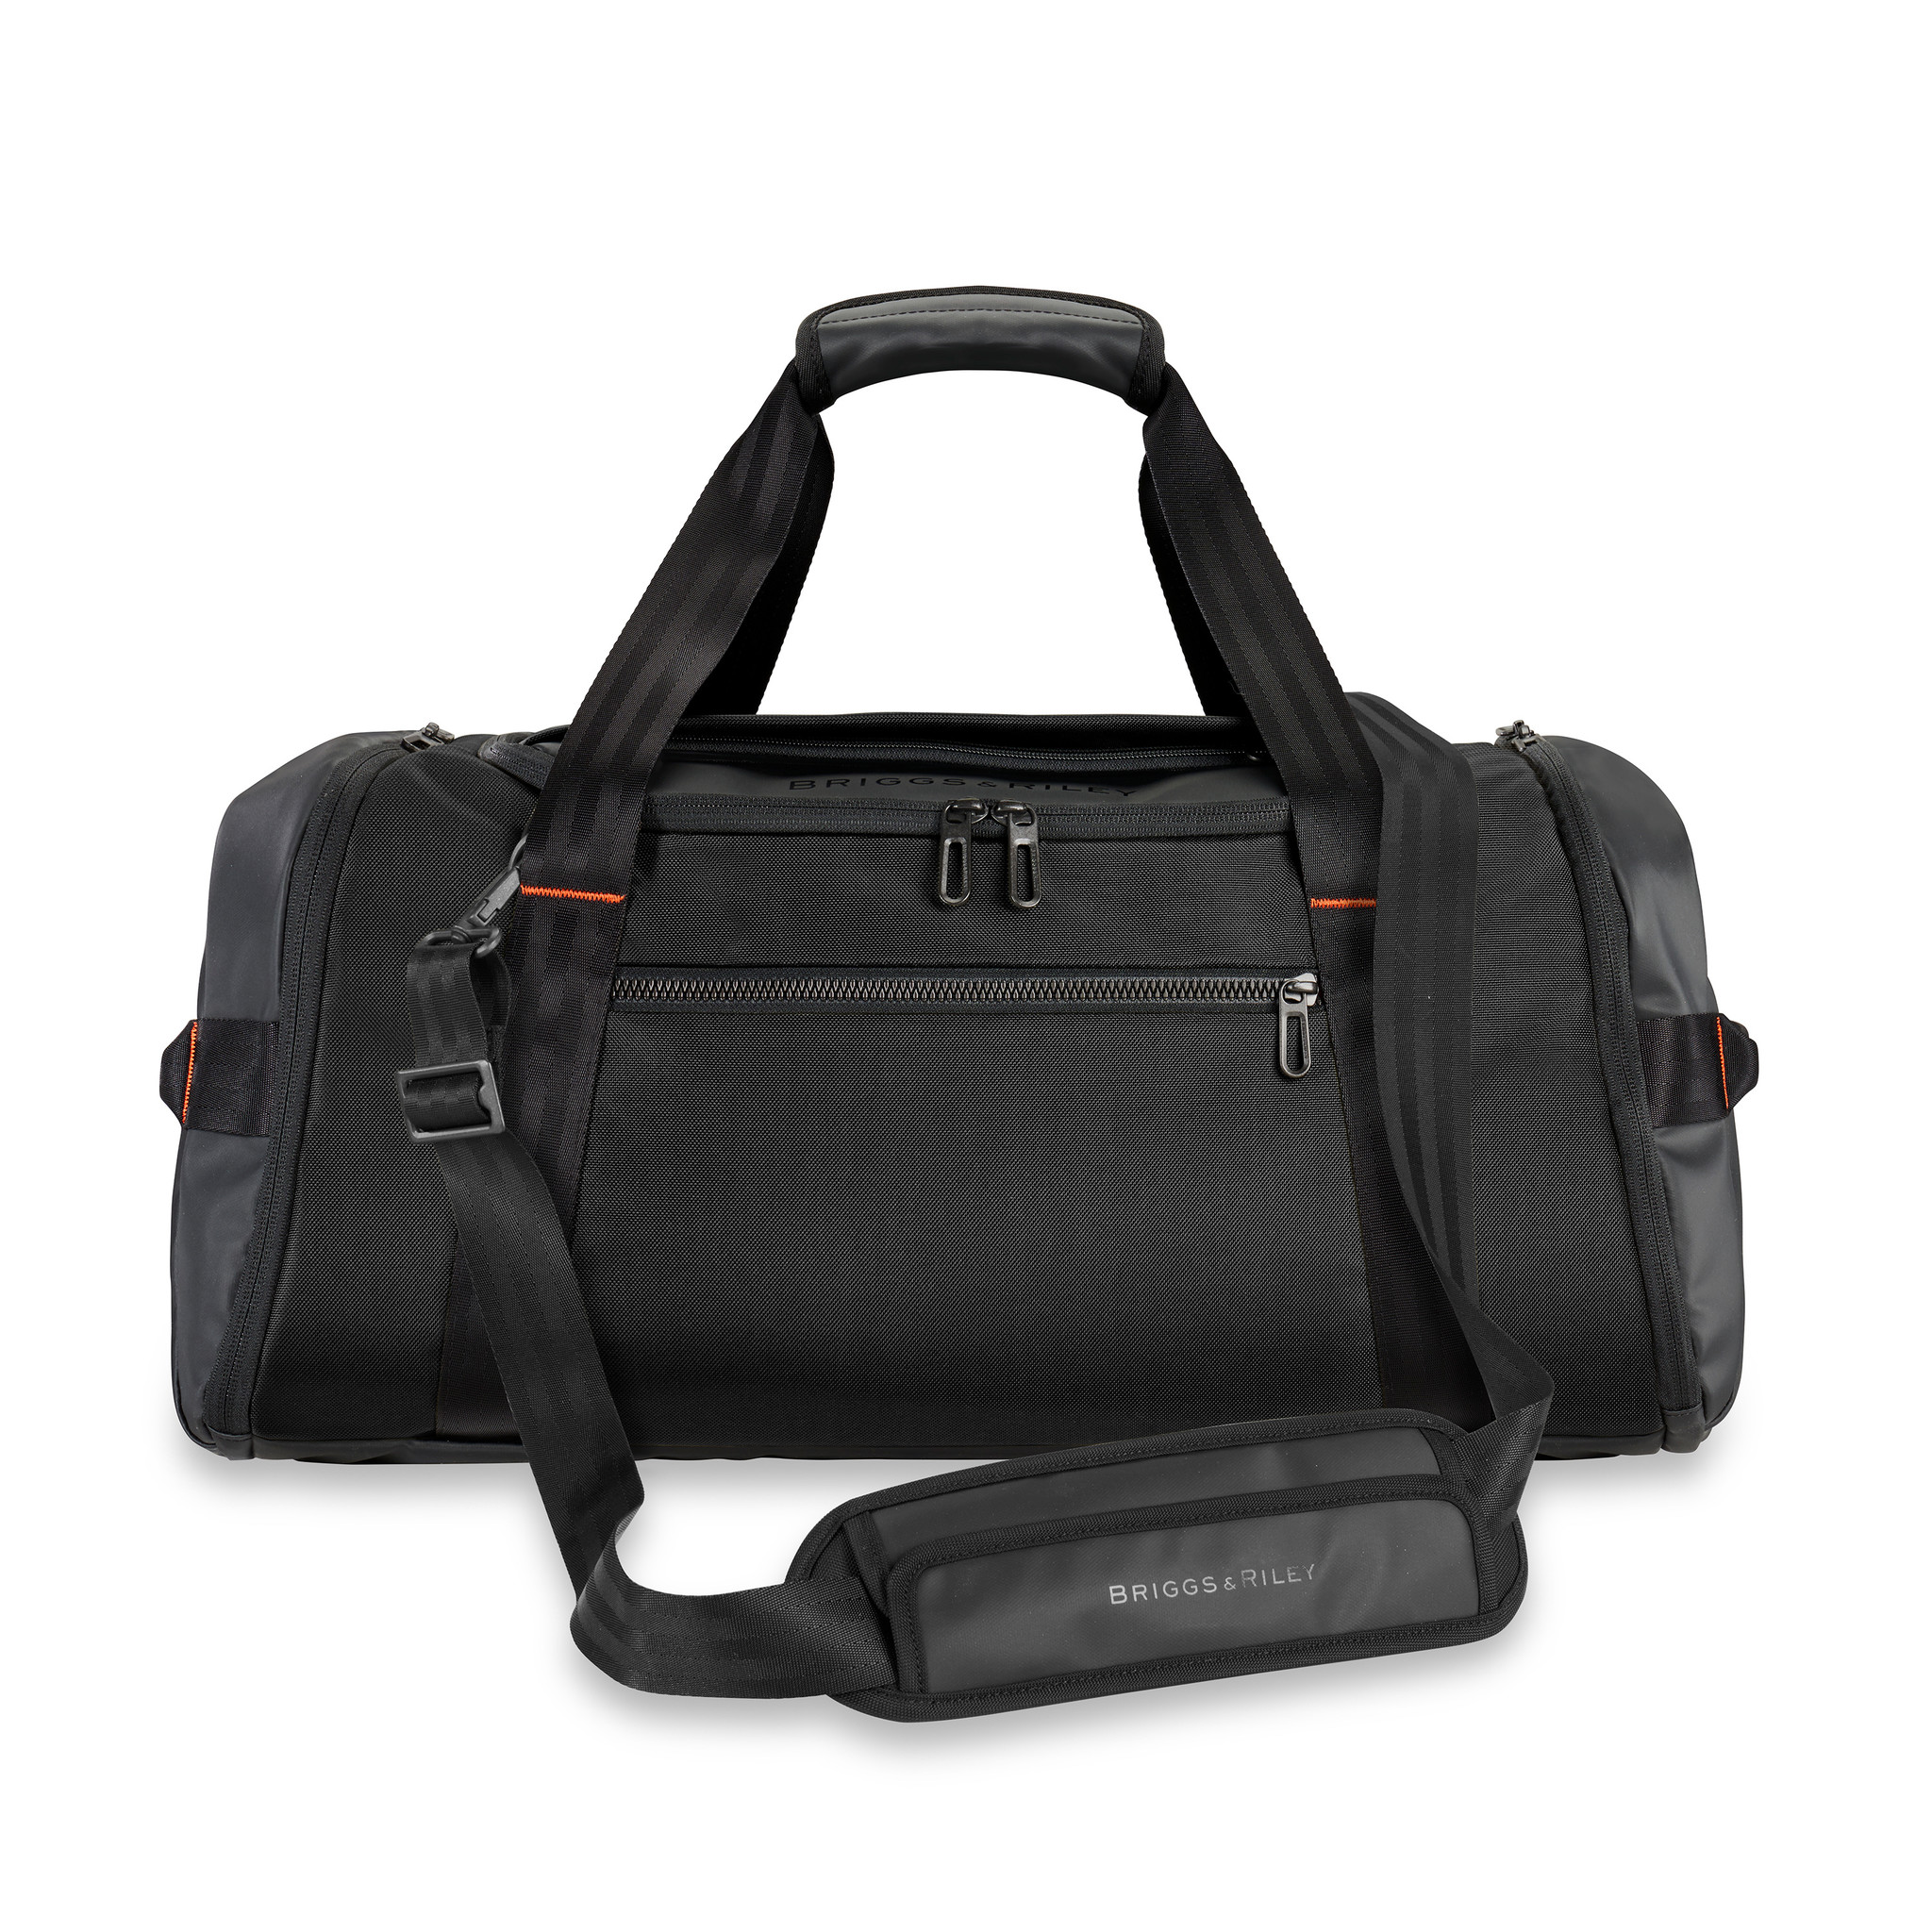 Briggs & Riley ZDX Large Travel Duffle- Black - Just Bags Luggage